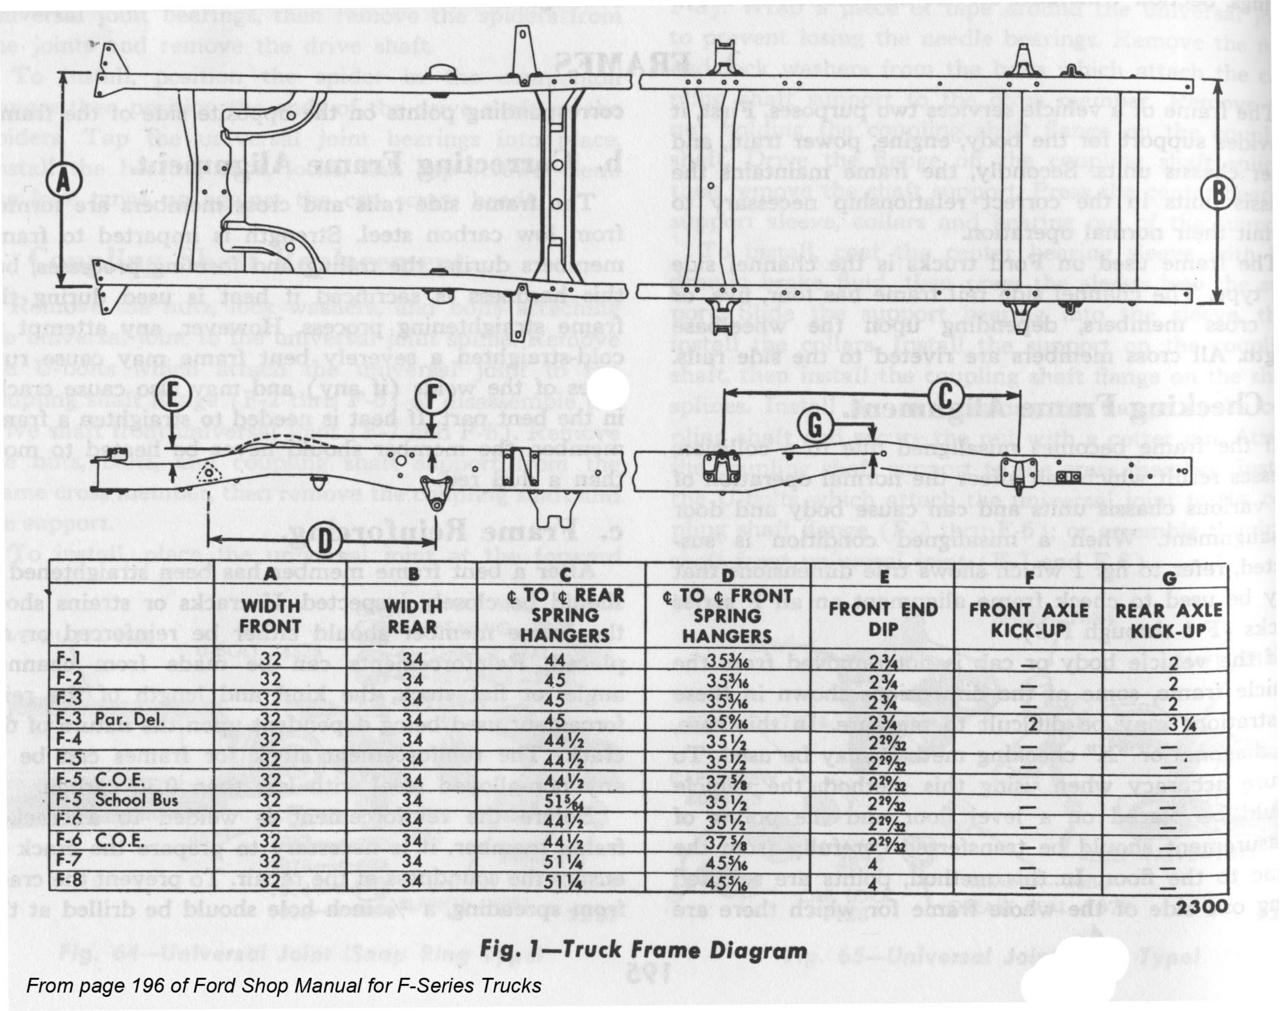 Ford chassis specs #3